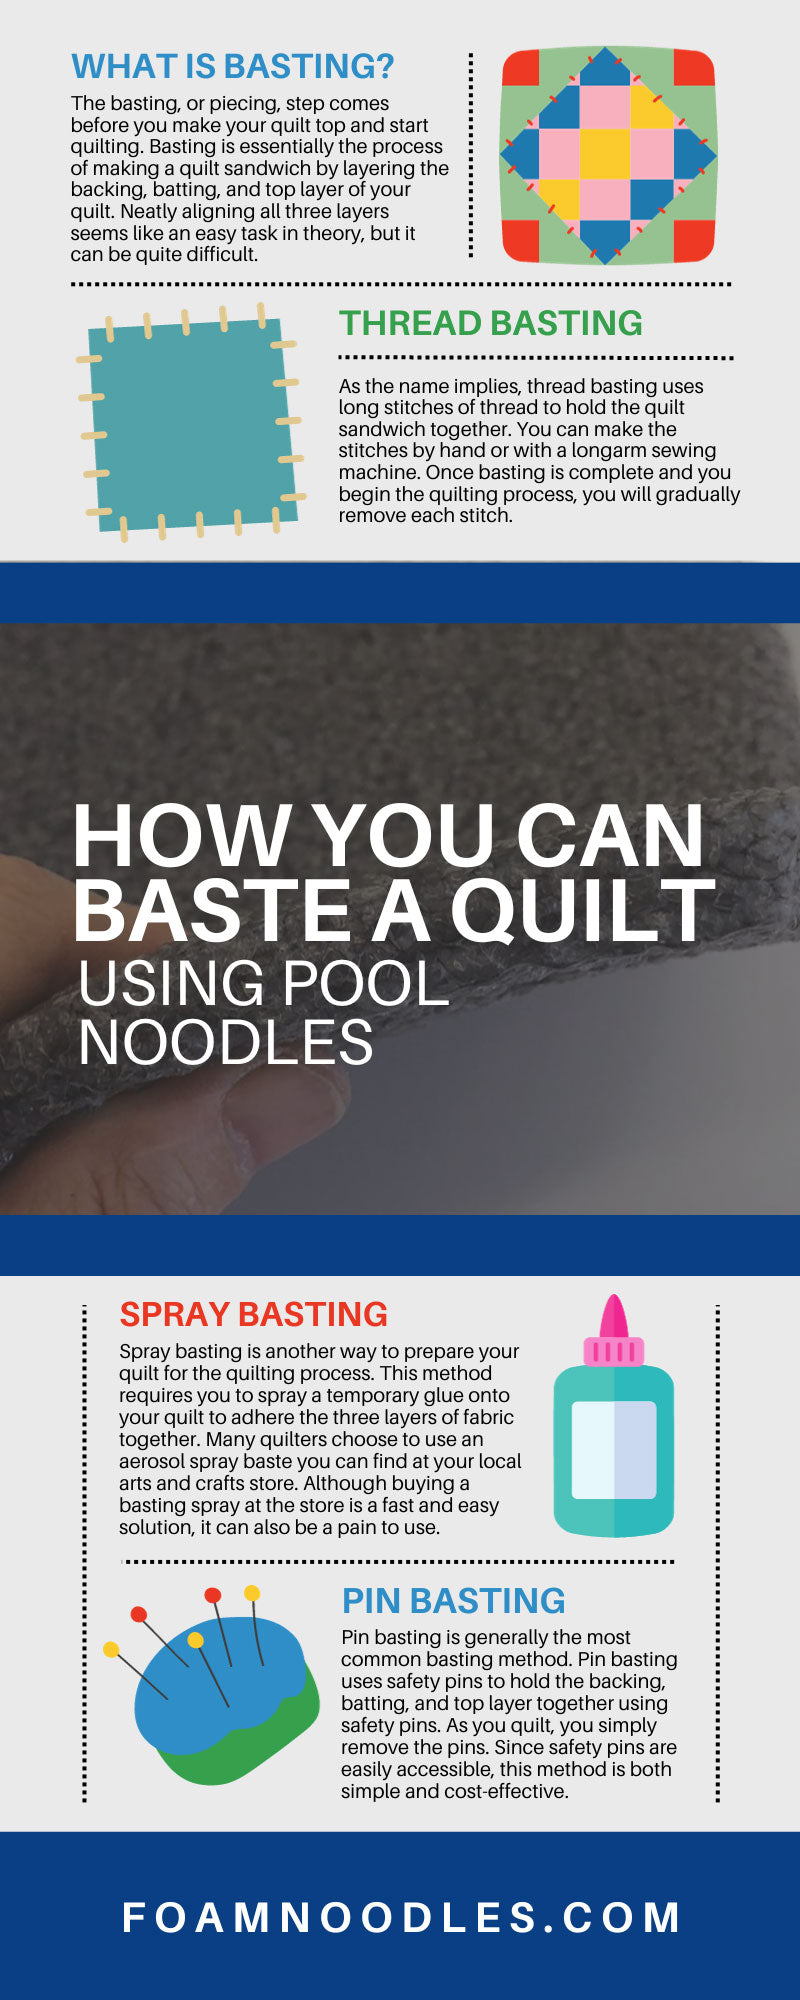 How You Can Baste a Quilt Using Pool Noodles